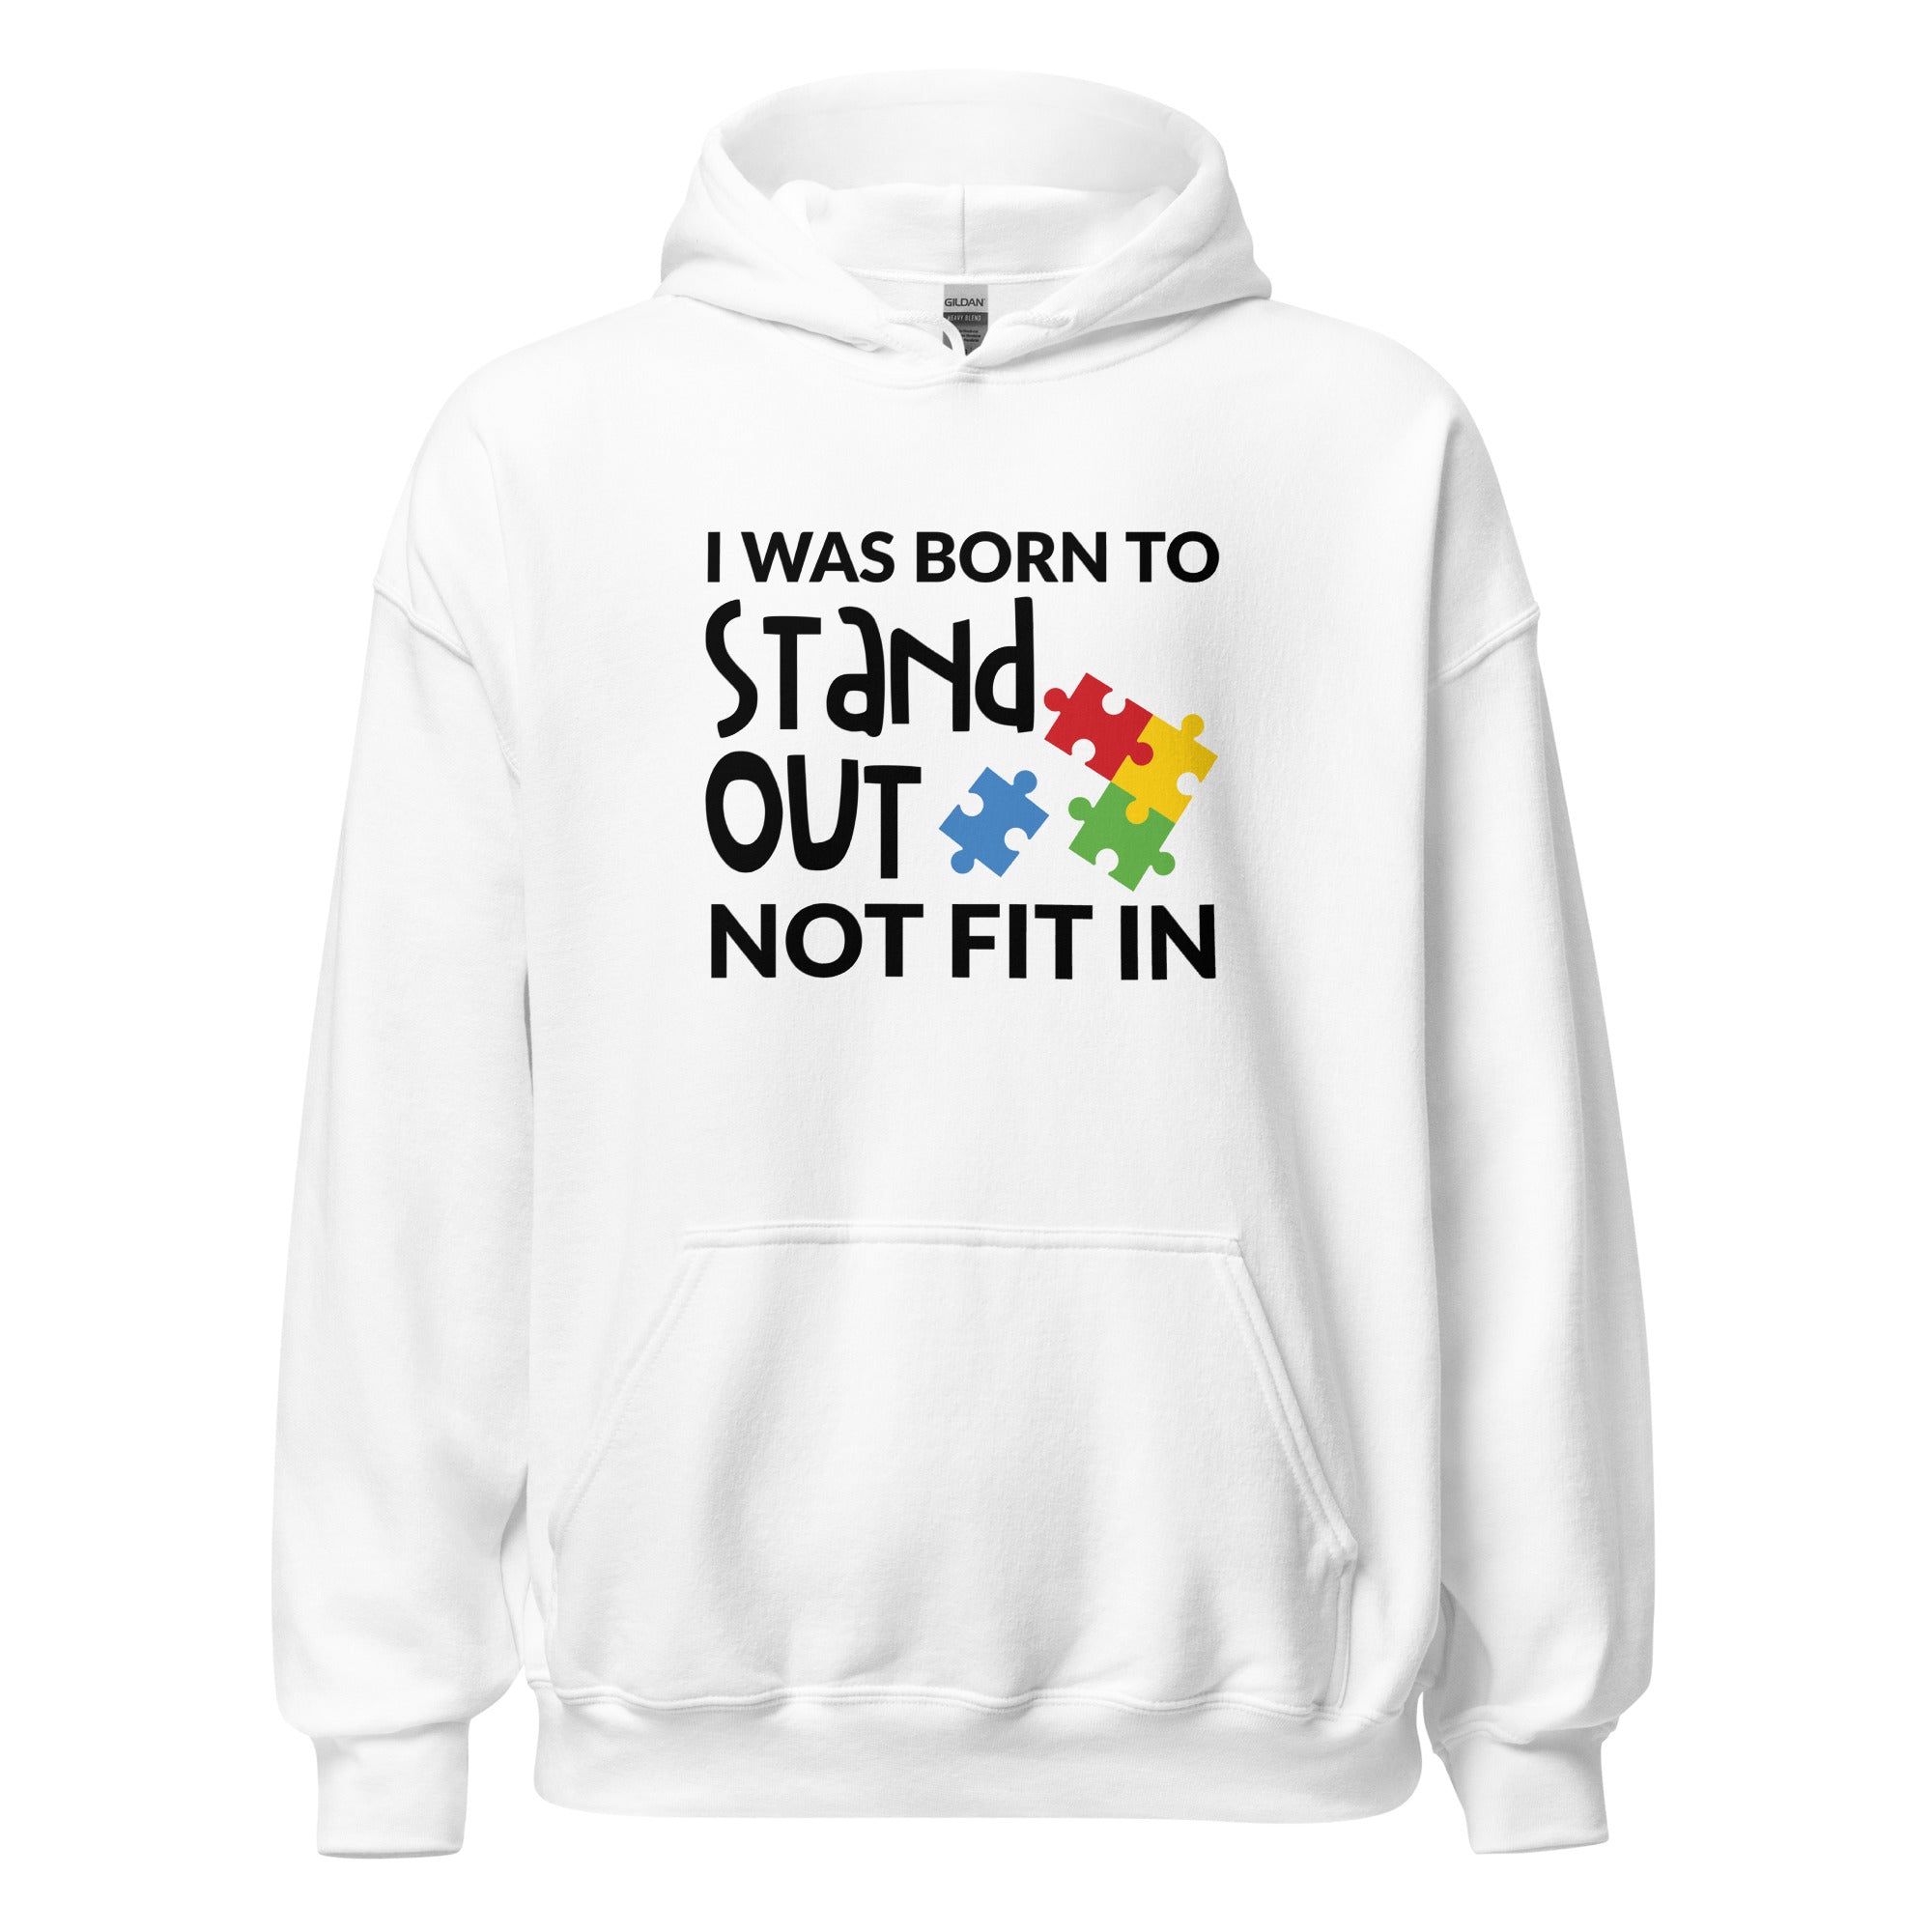 Unisex Hoodie- I was born to stand out not fit in